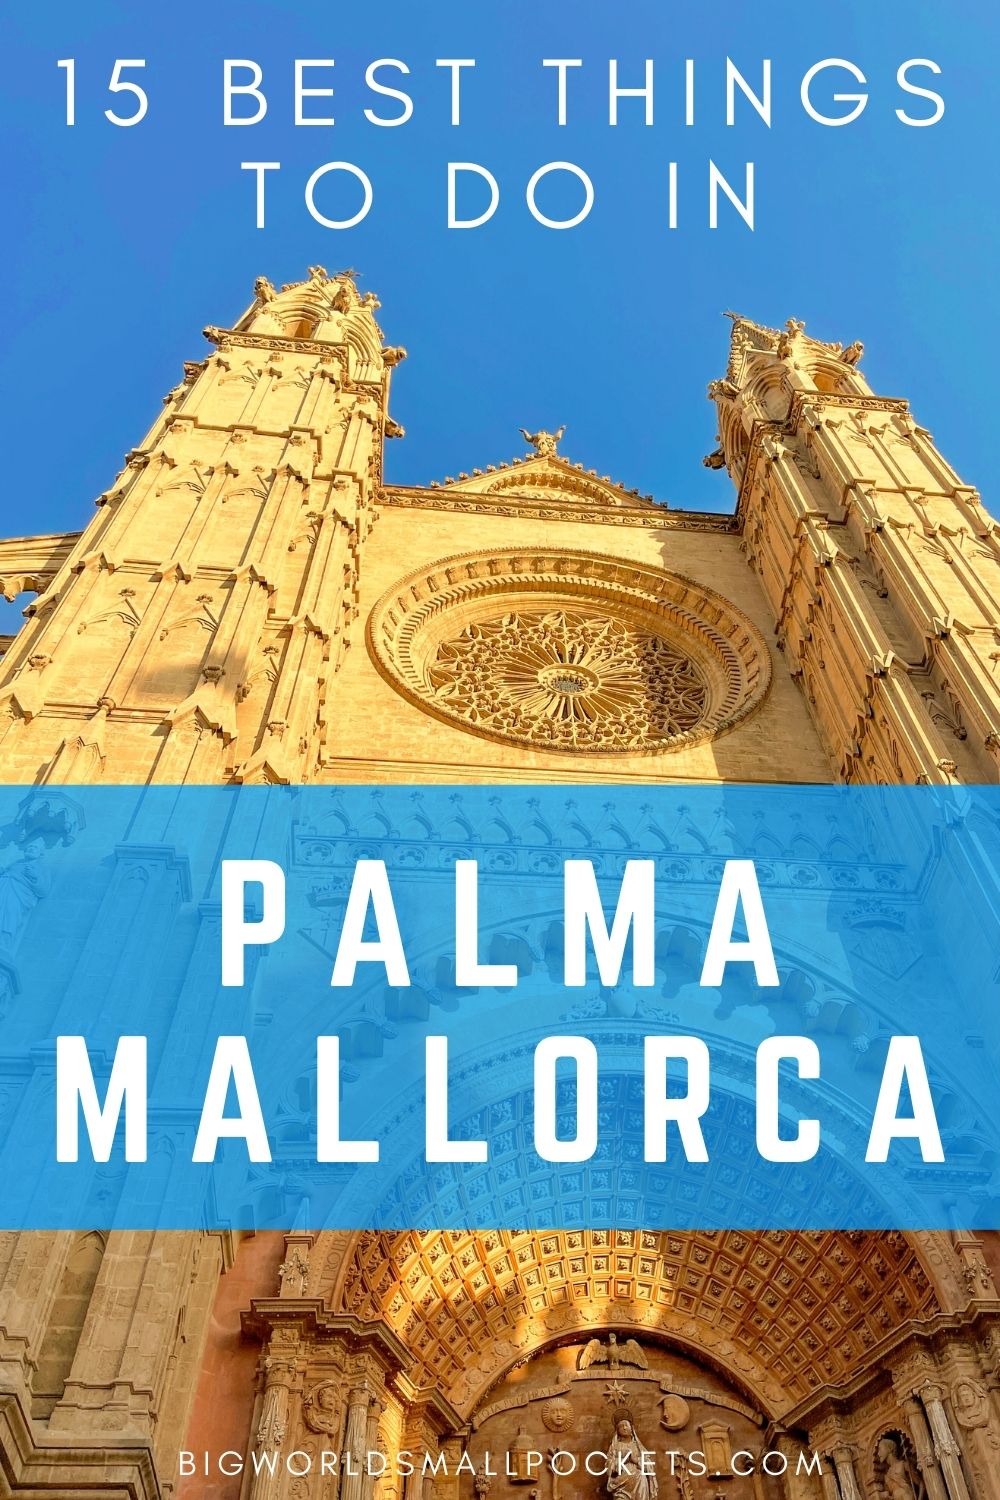 15-Best-Things-to-Do-in-Palma-Mallorca